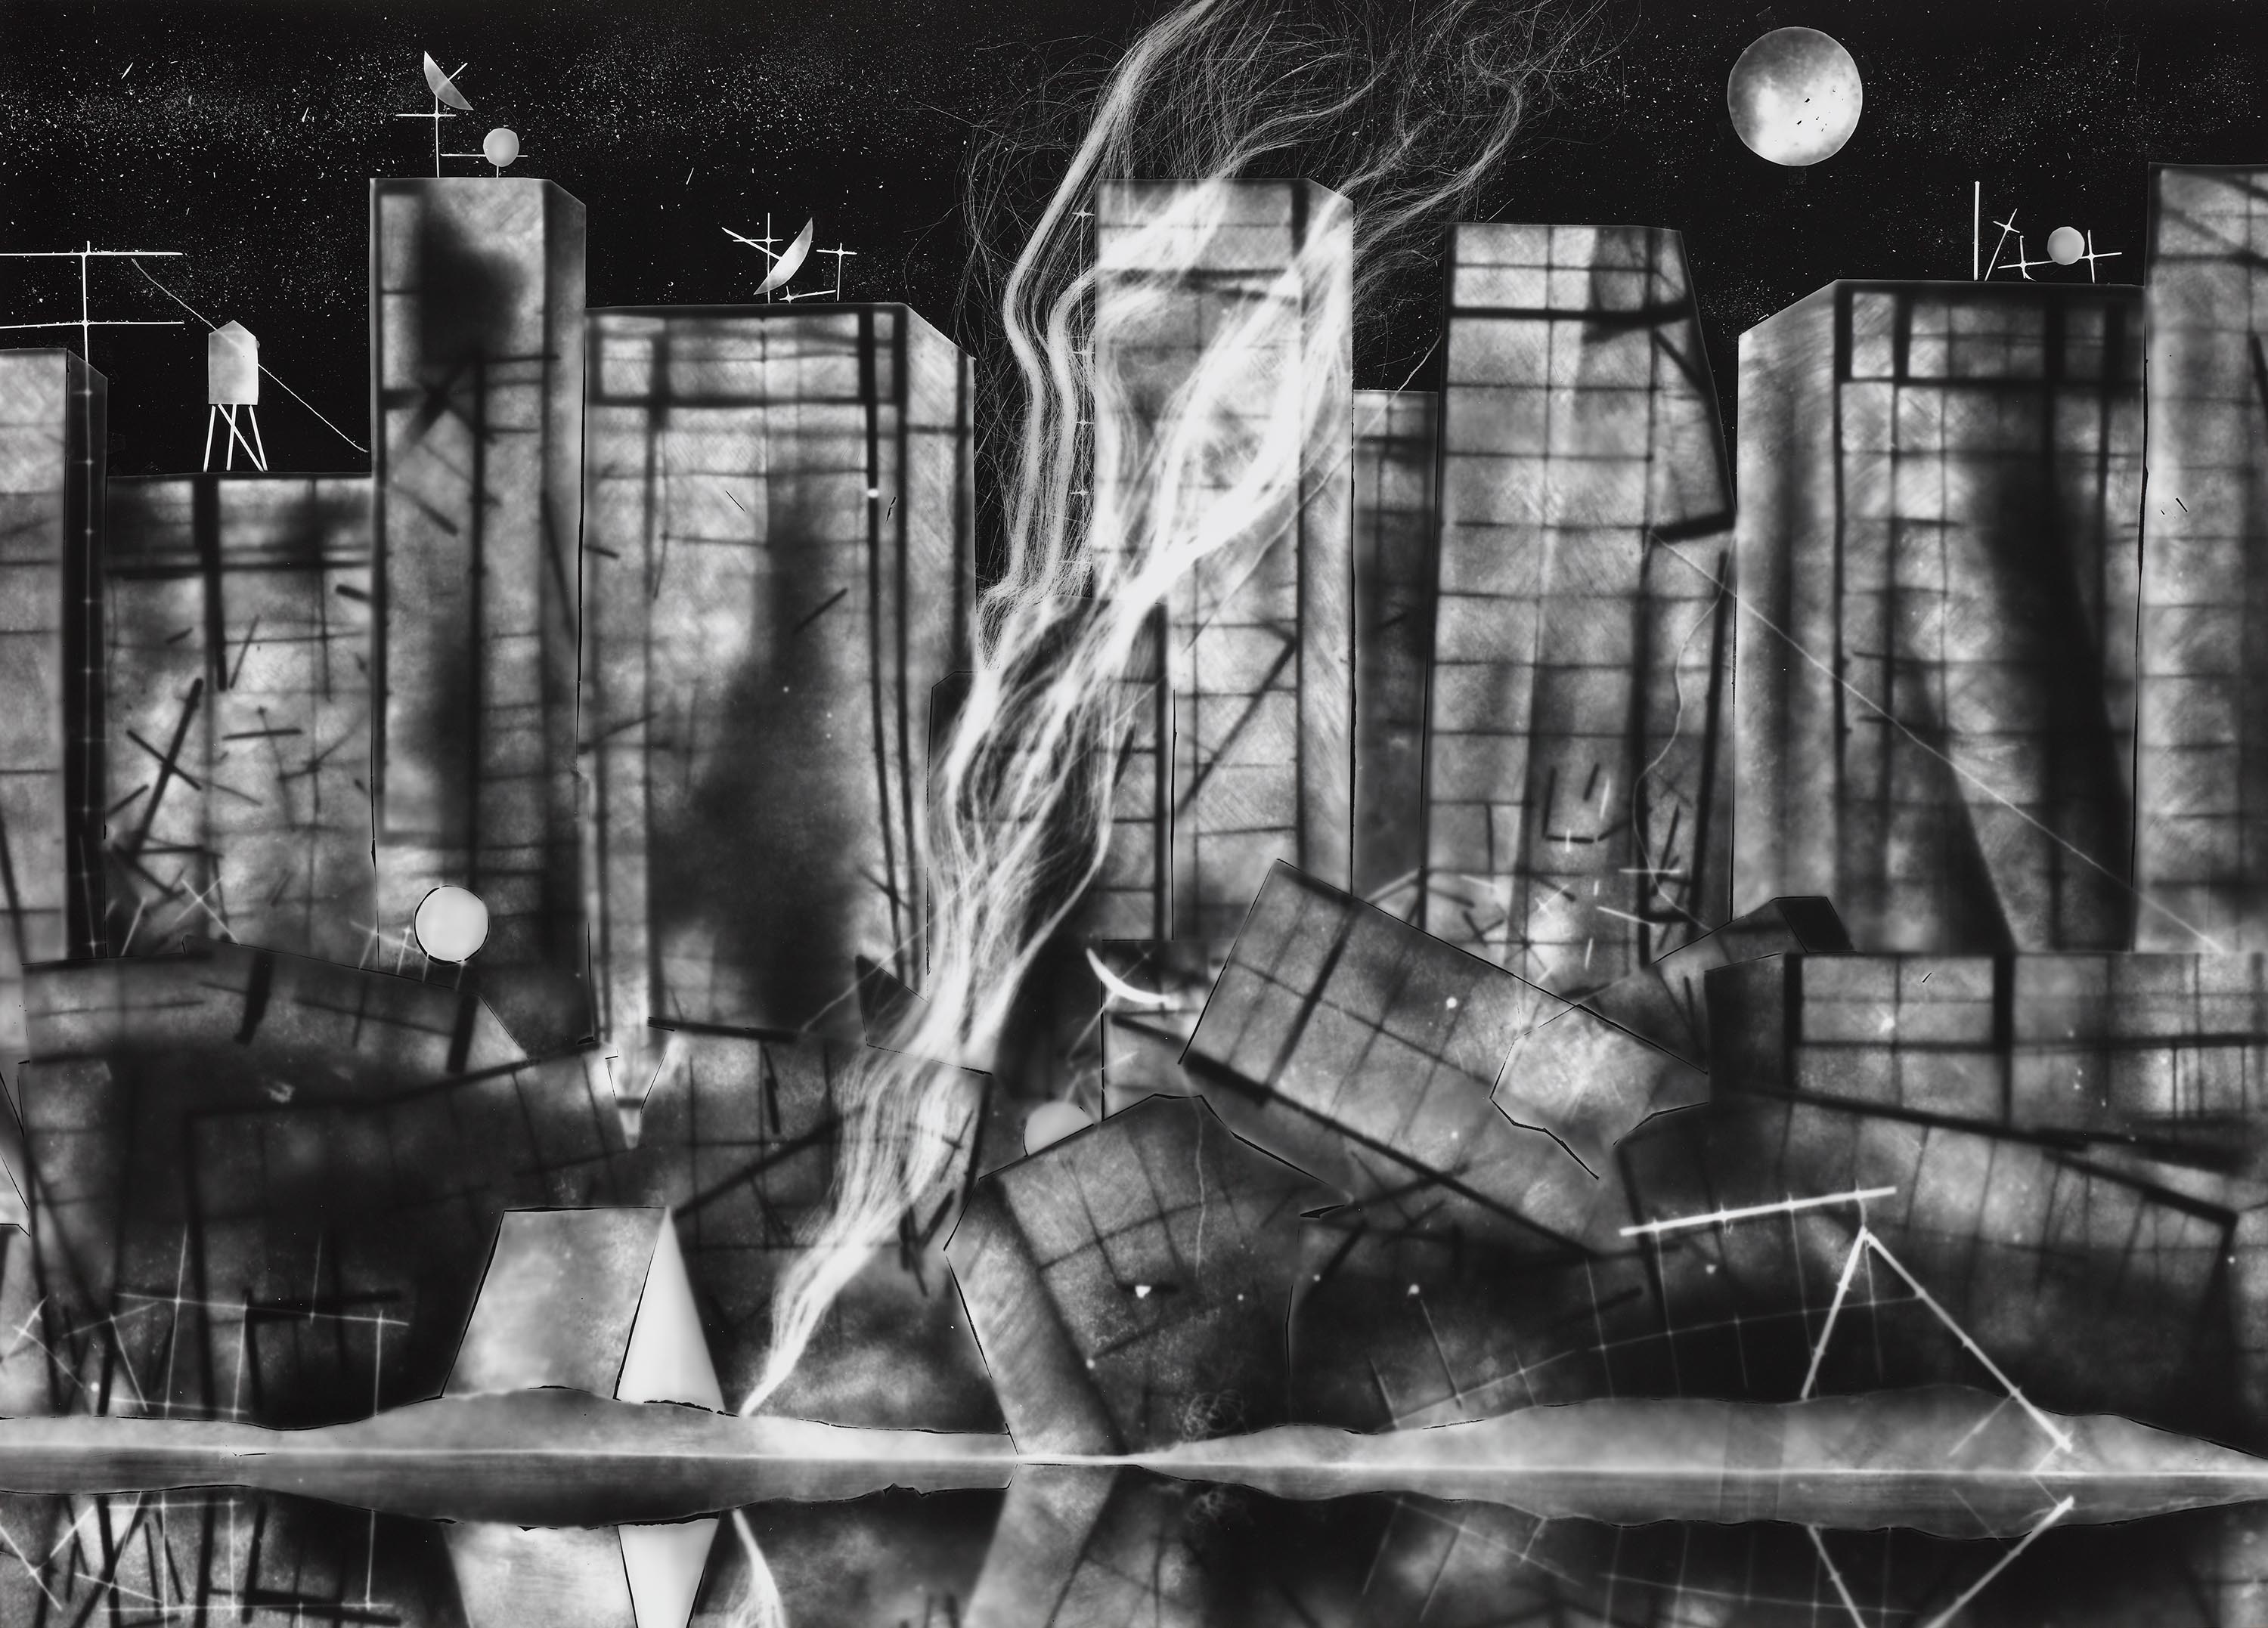 Searching for Shelter No. 1 / 142 x 196 cm / photogram, gelatin silver print / 2021